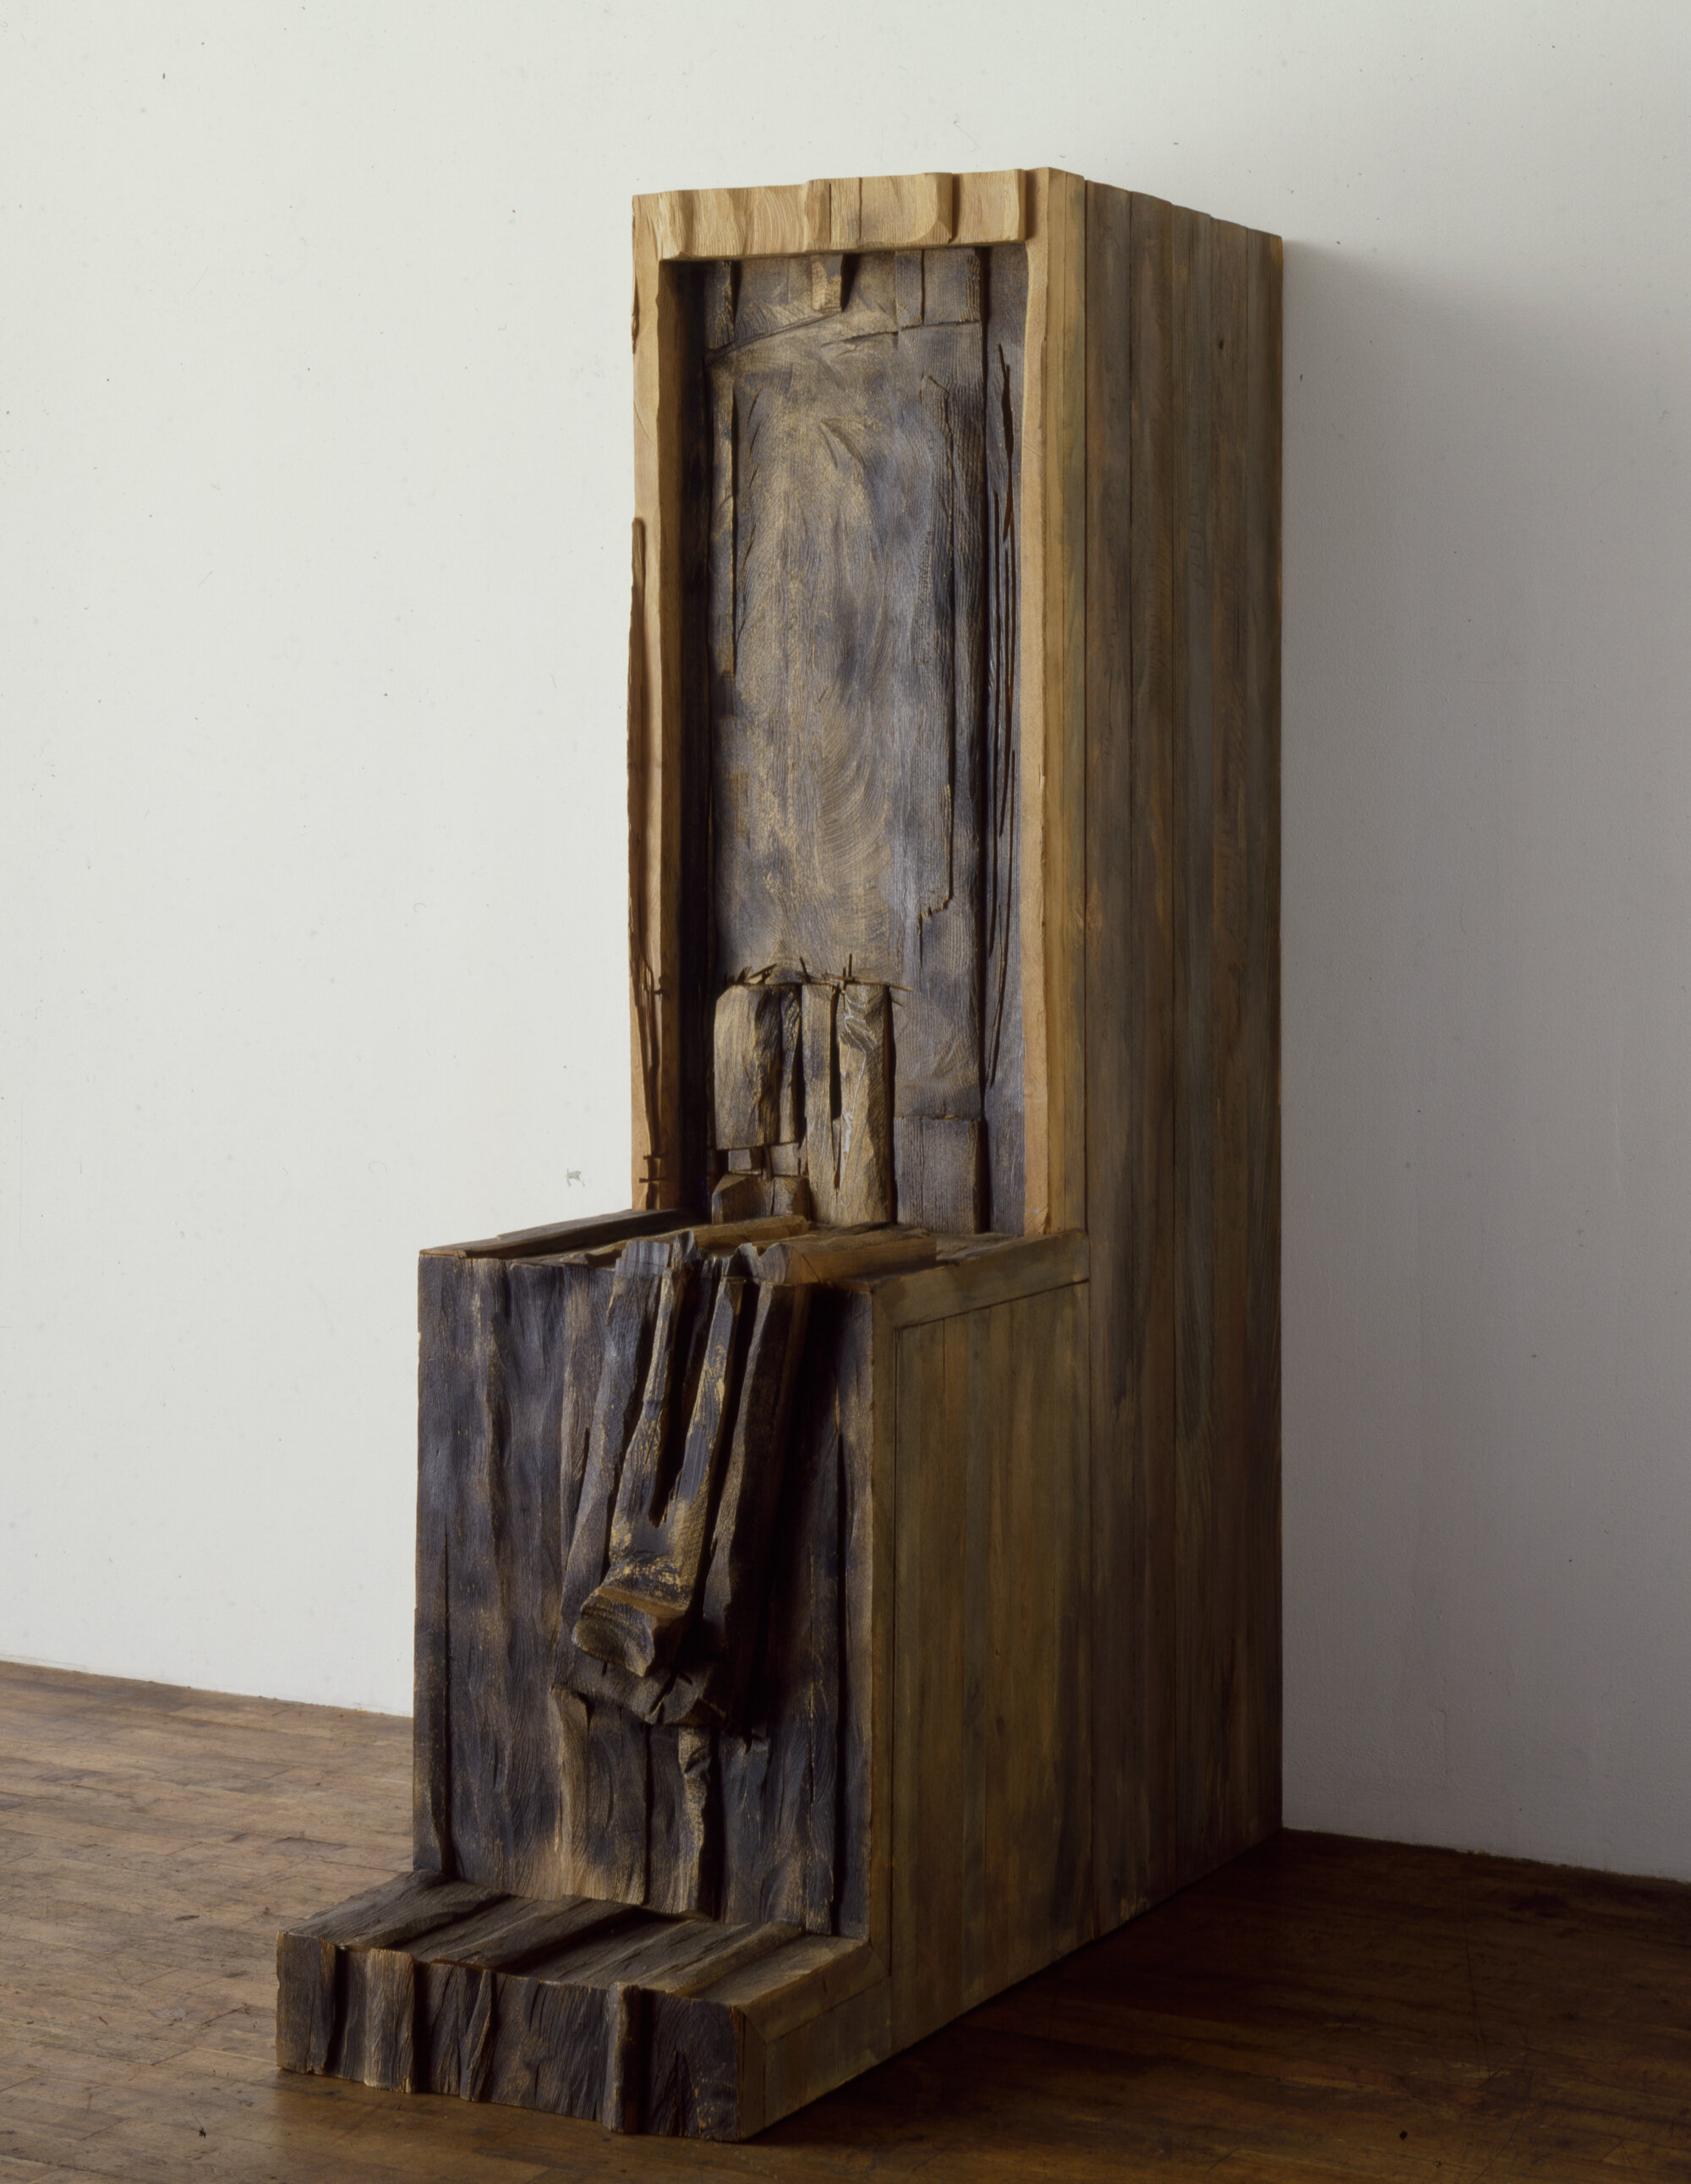       Confessor's Chair , 1989 Cedar and stain 18 x 42 x 66 in.    Storm King Art Center  